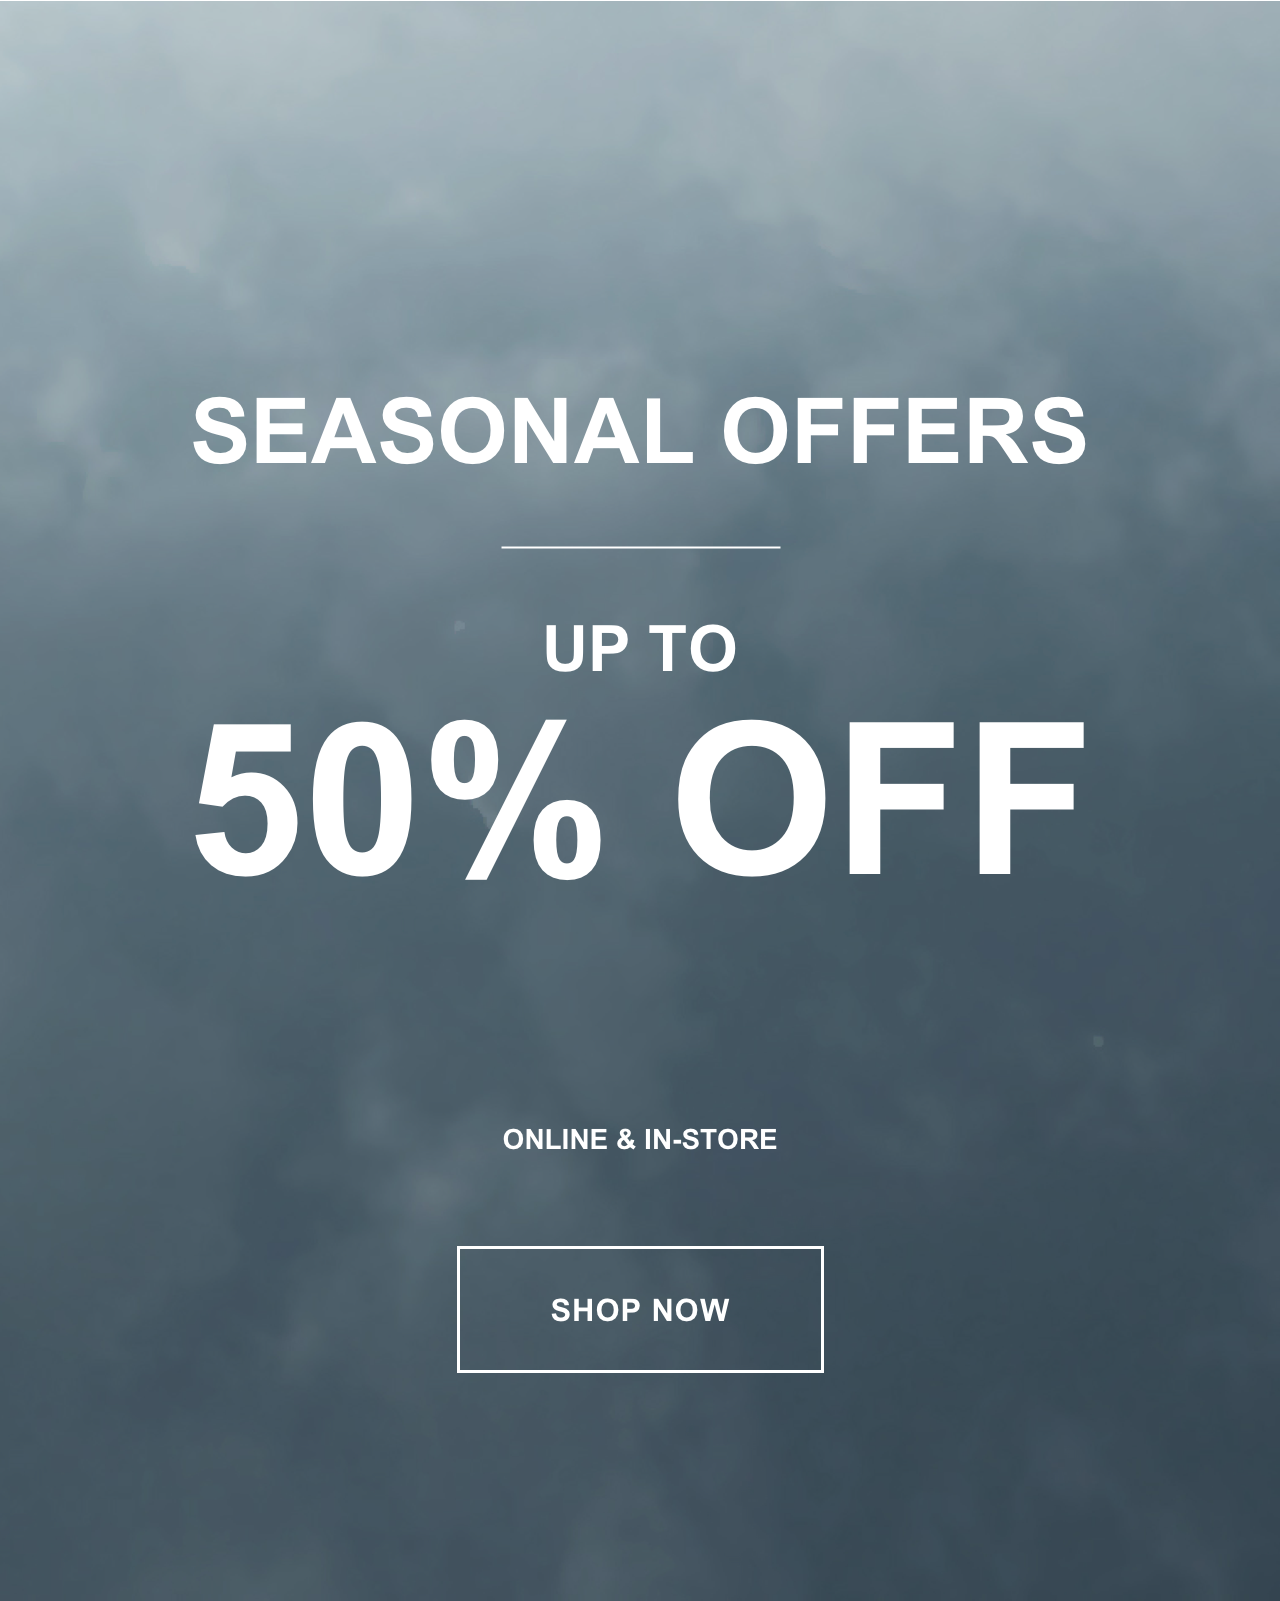 Seasonal Offers - Up To 50% Off